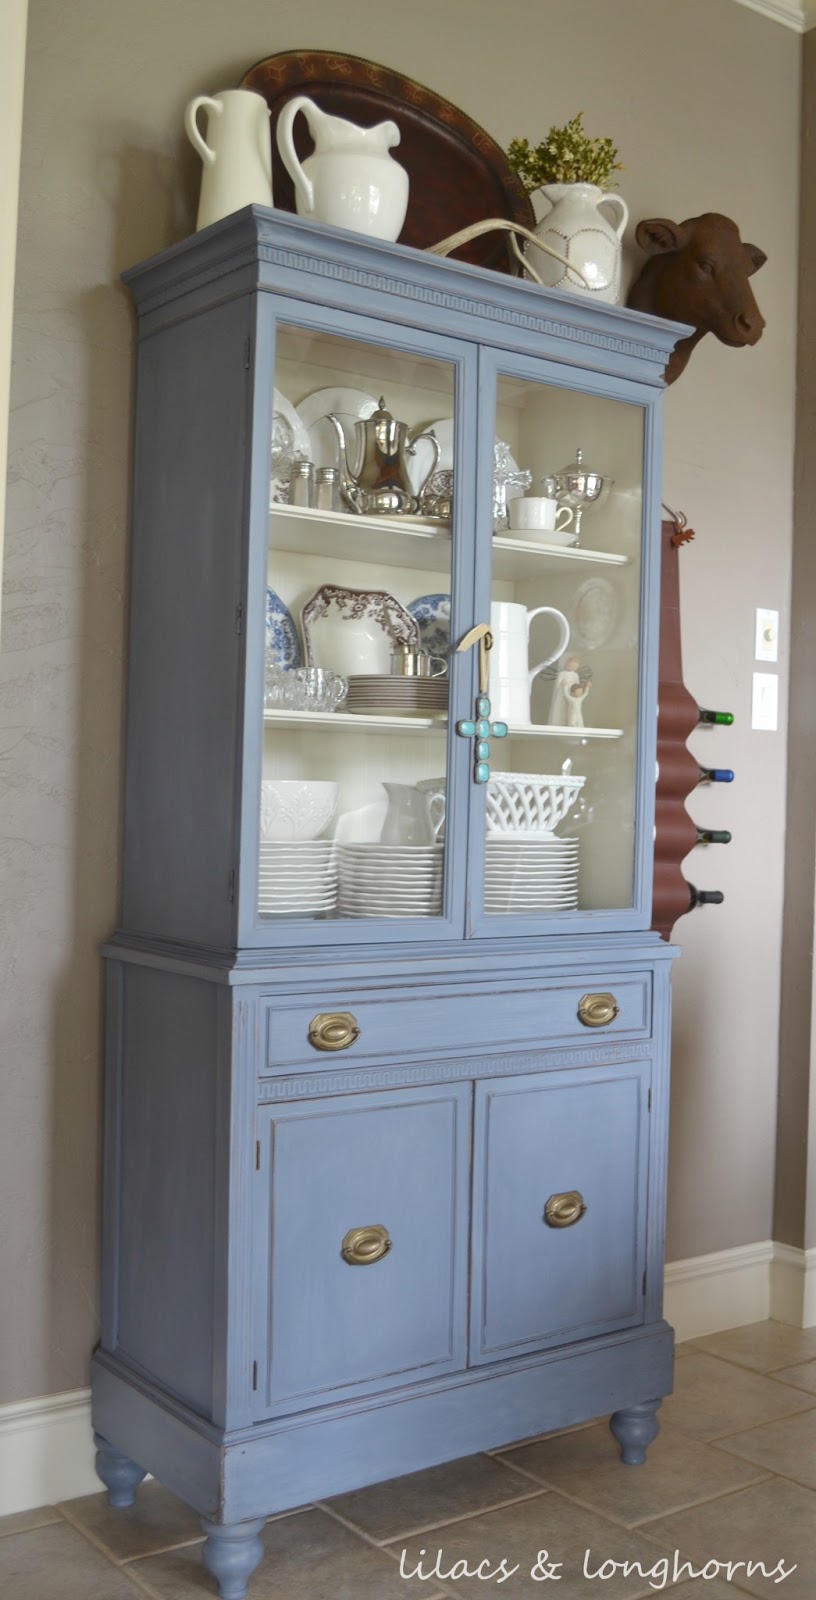 China Hutch Makeover - Guest Post from Lilacs & Longhorns